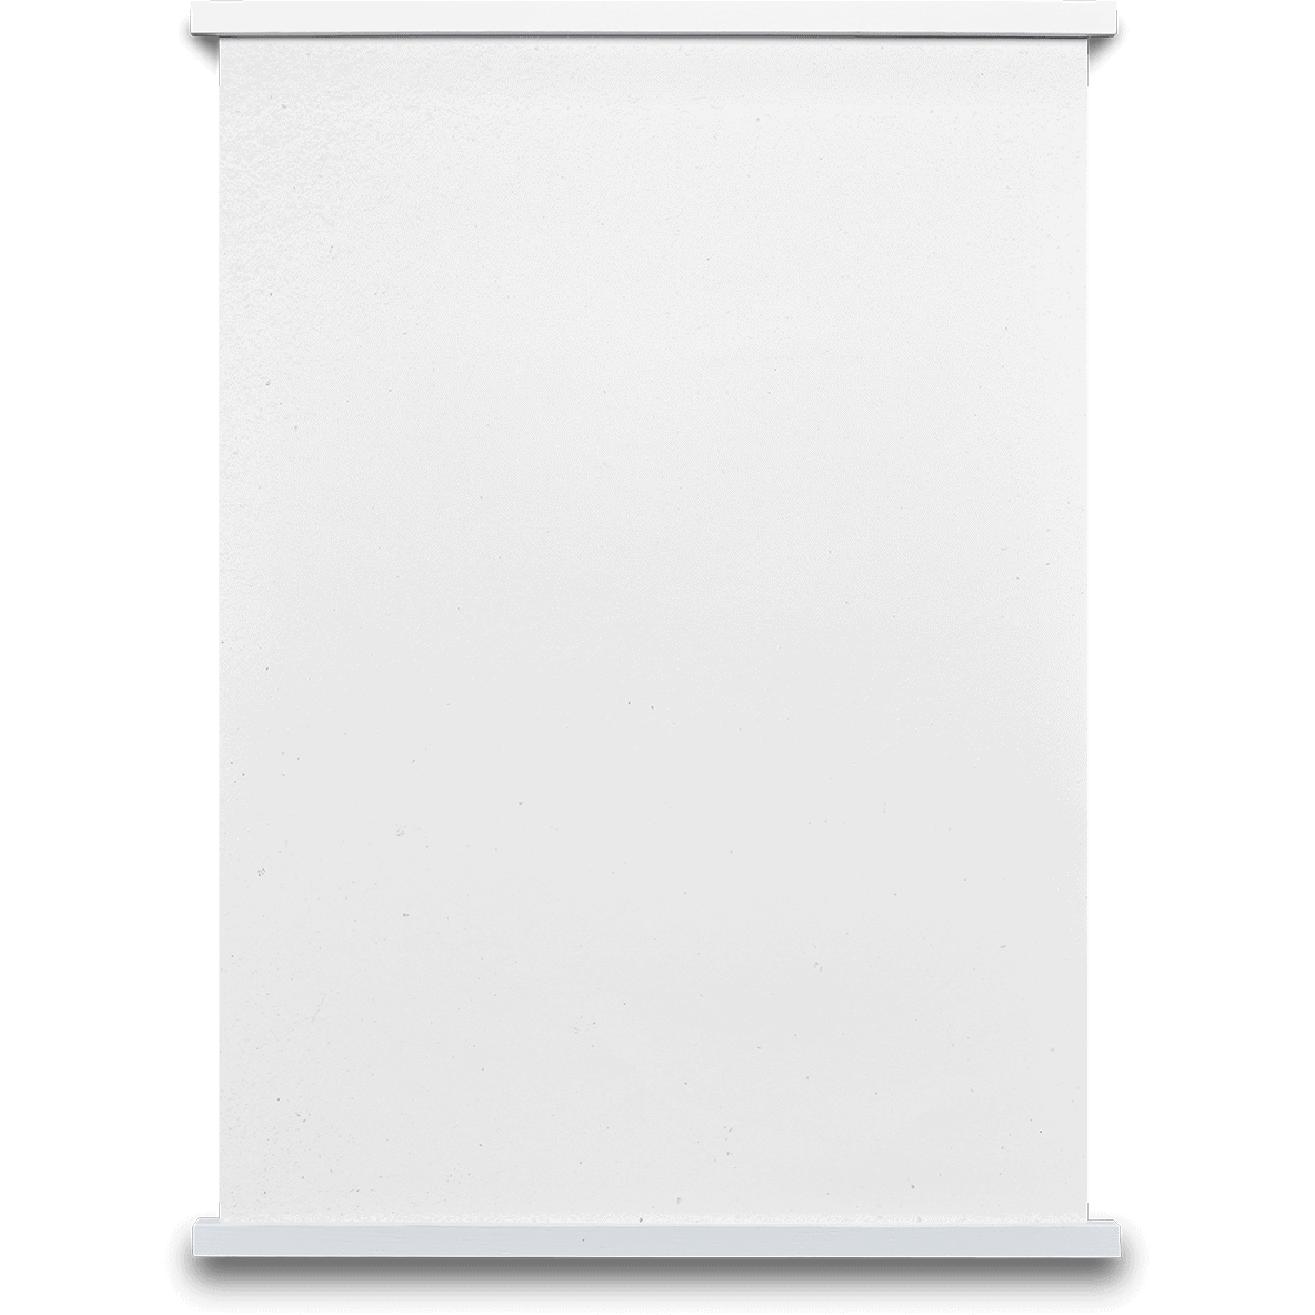 Paper Collective S Tii Cks 73 Magnetic Poster Bar, White